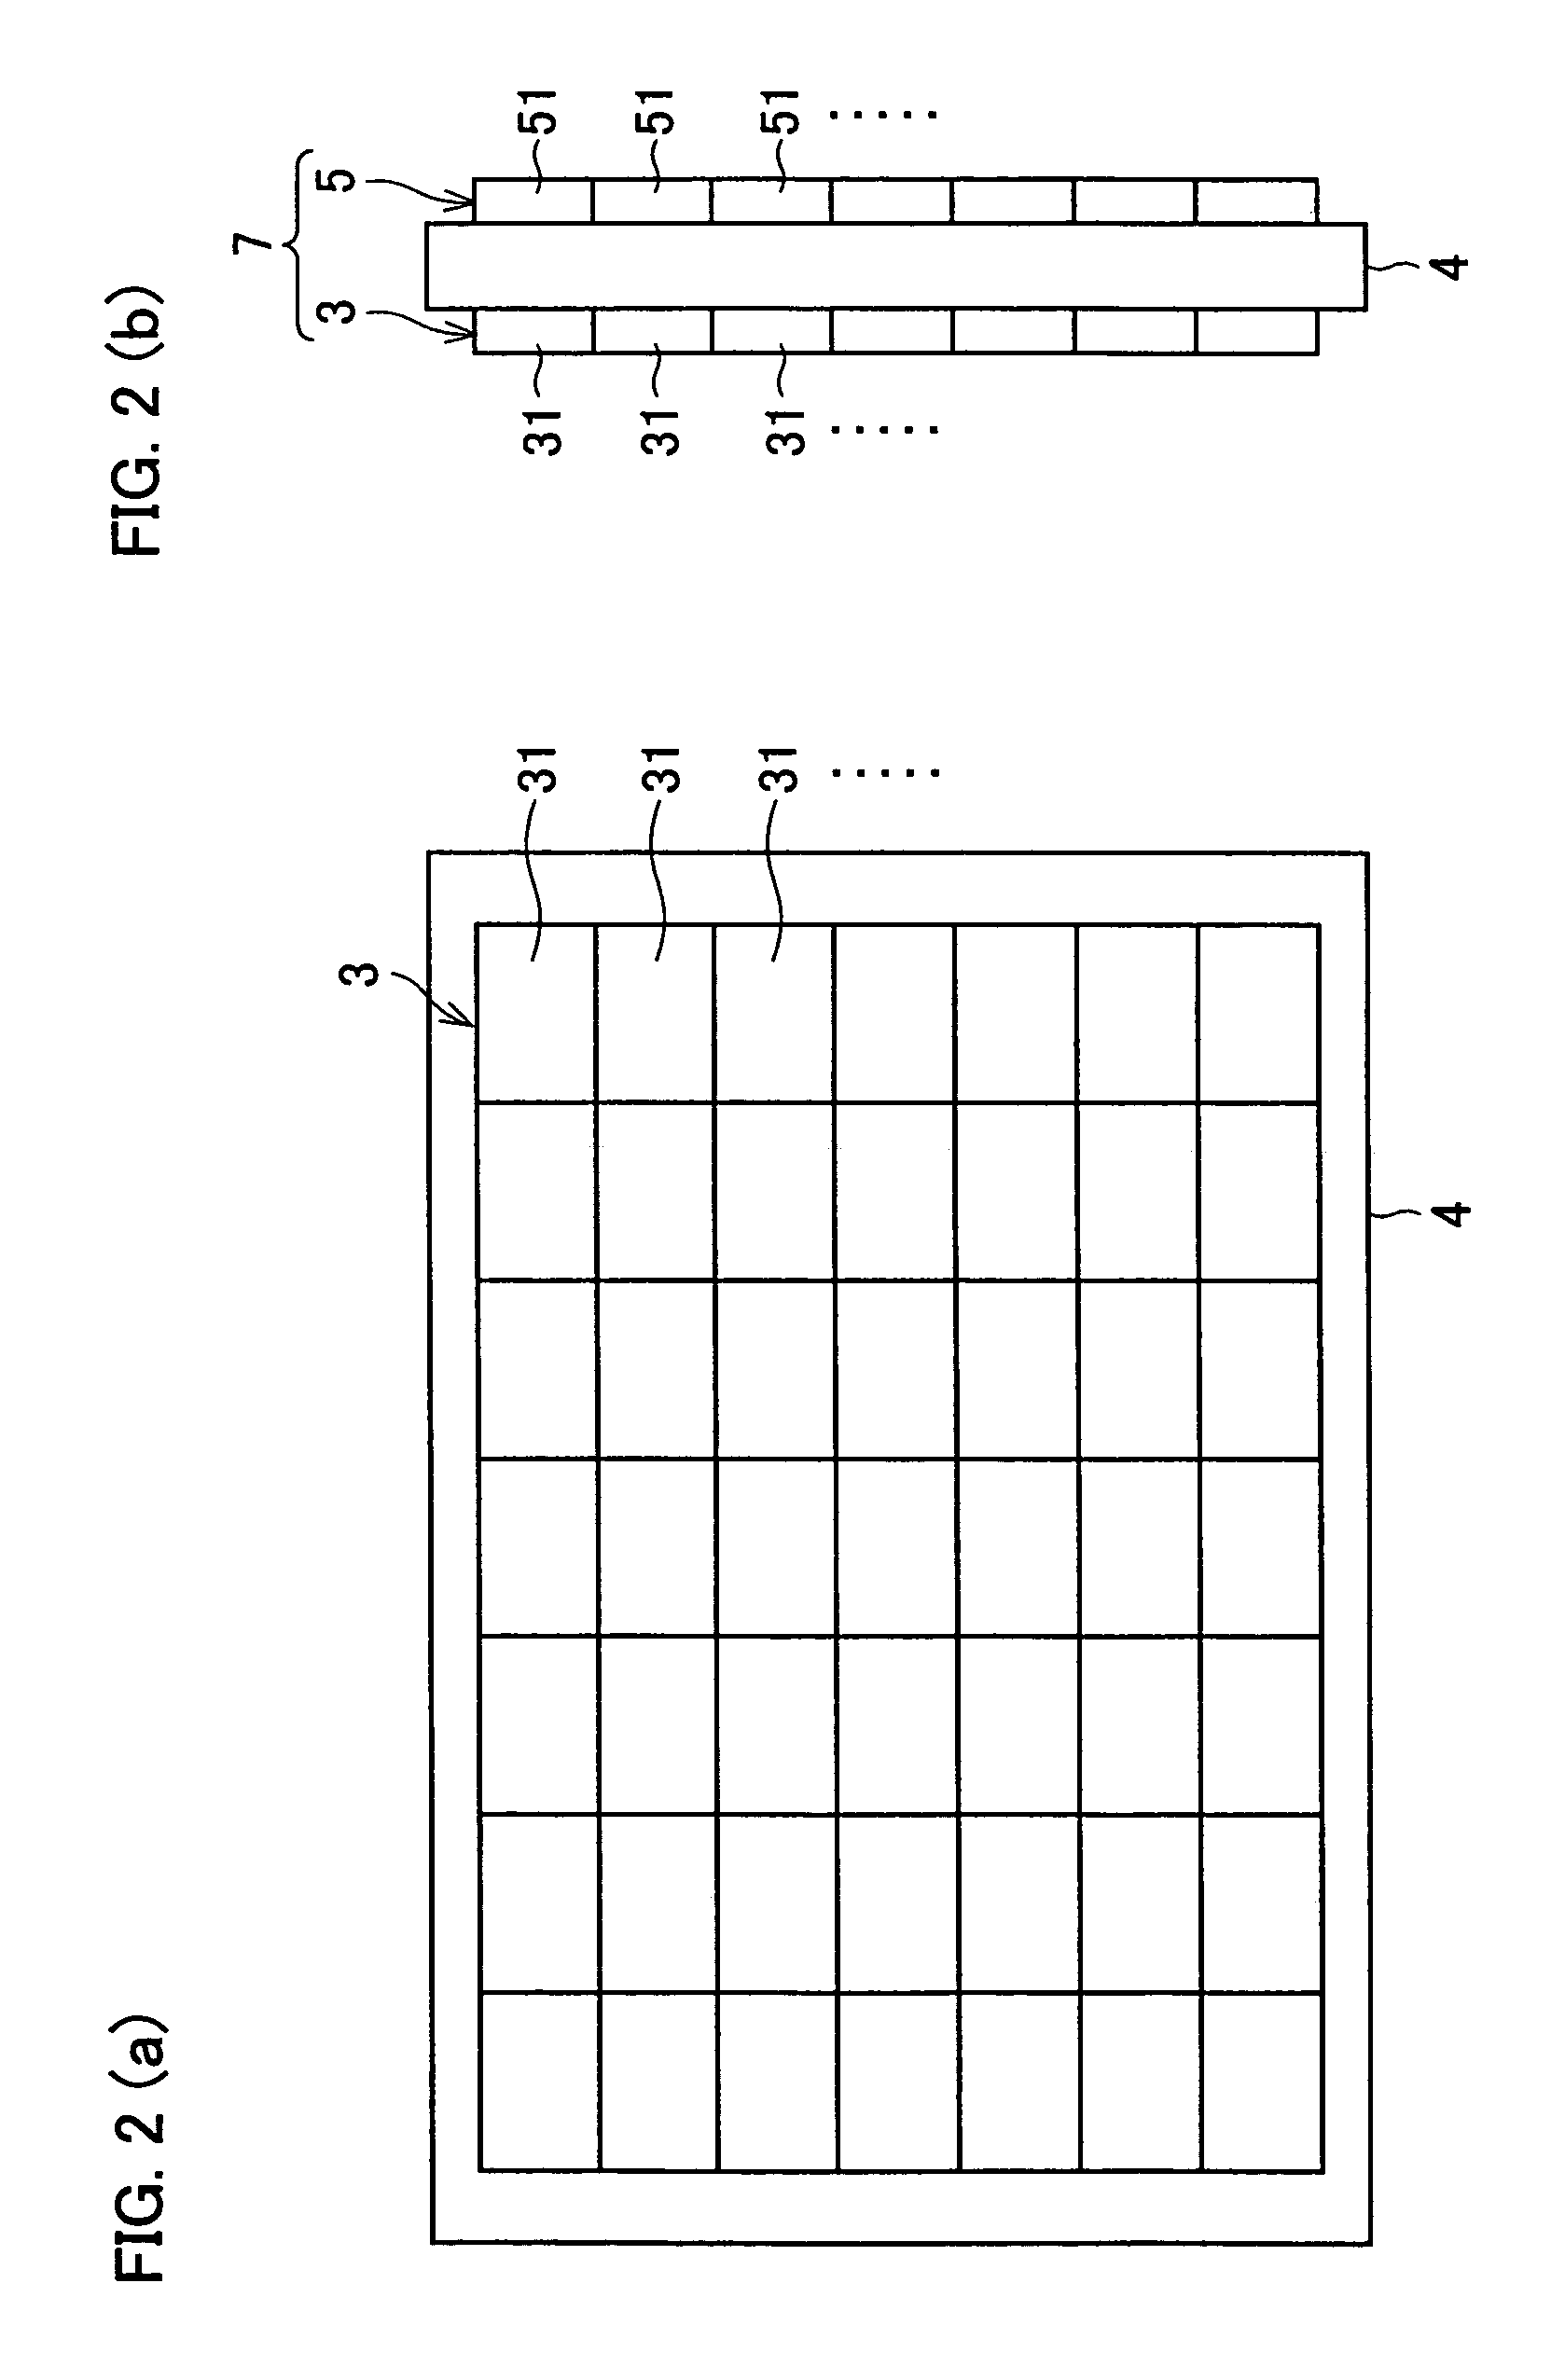 Backlight device, display apparatus including backlight device, method for driving backlight device, and method for adjusting backlight device